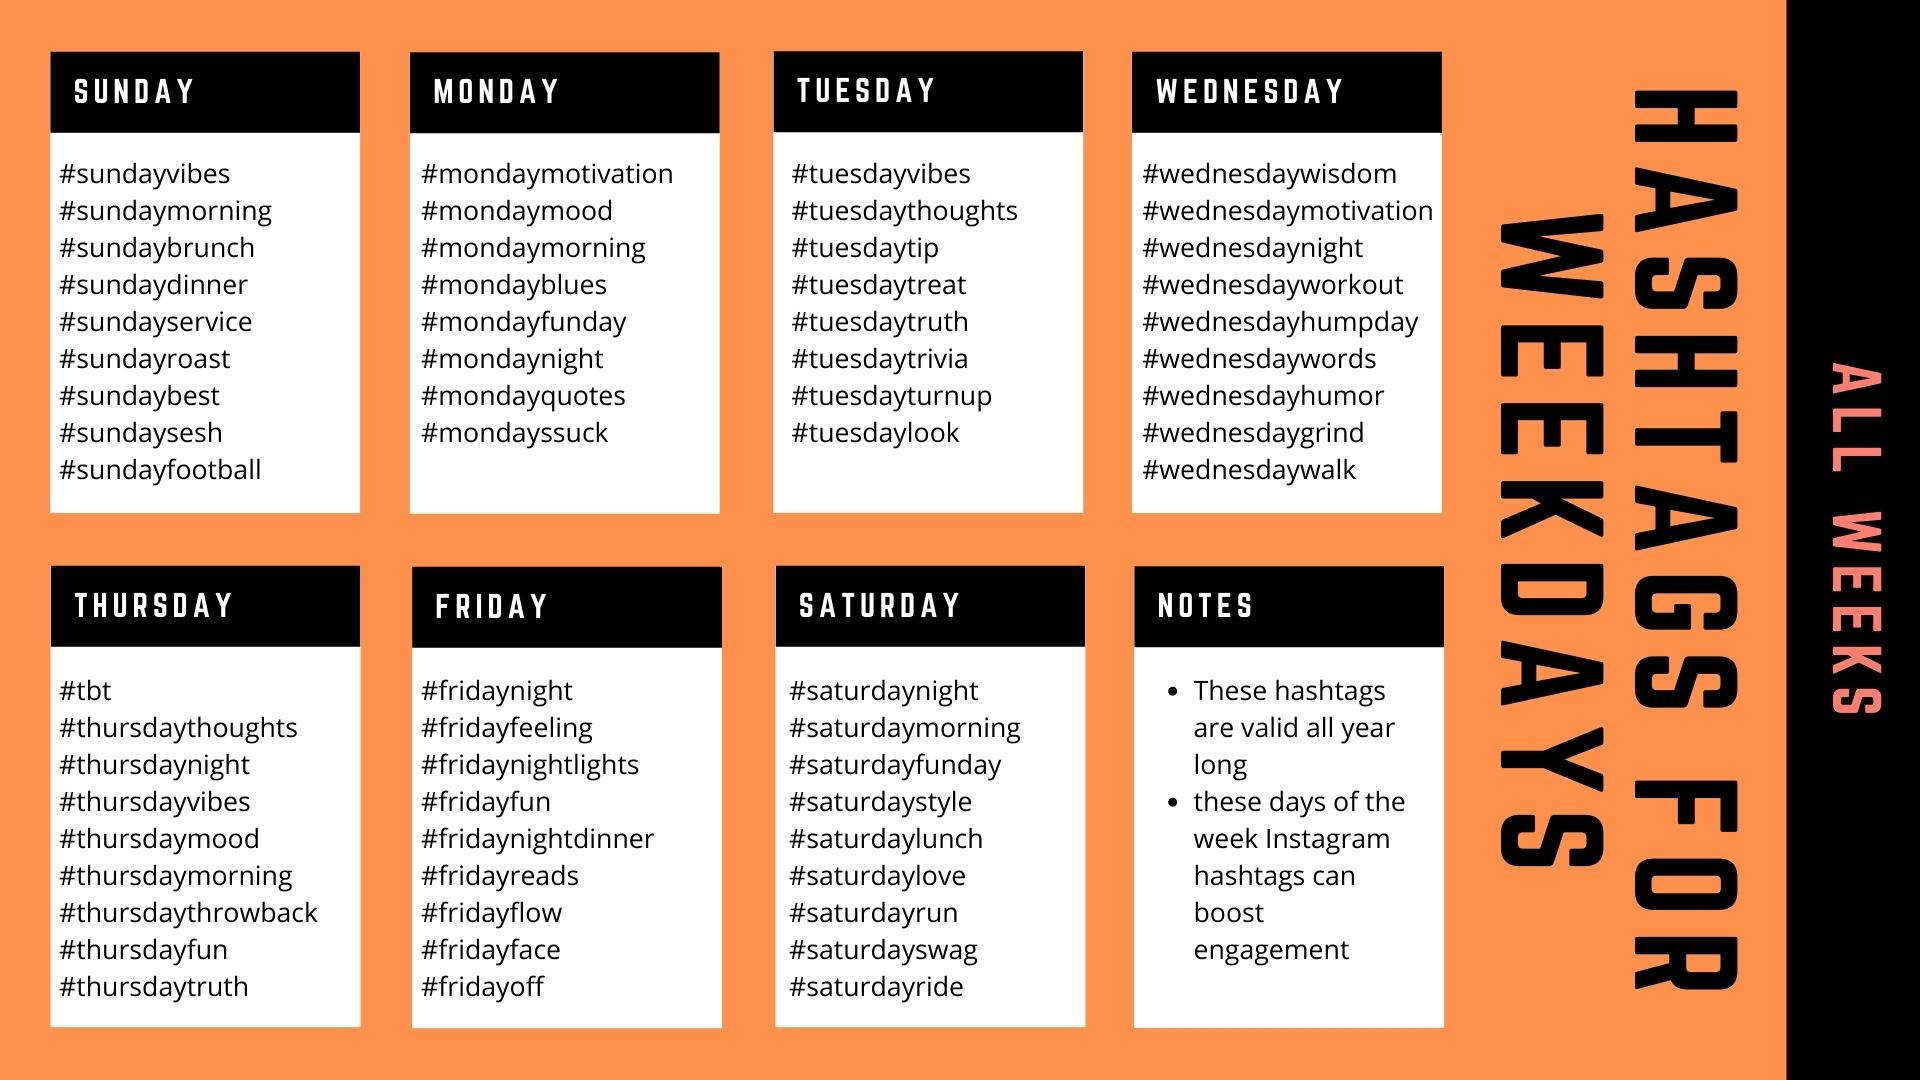 Special hashtags for every day of the week